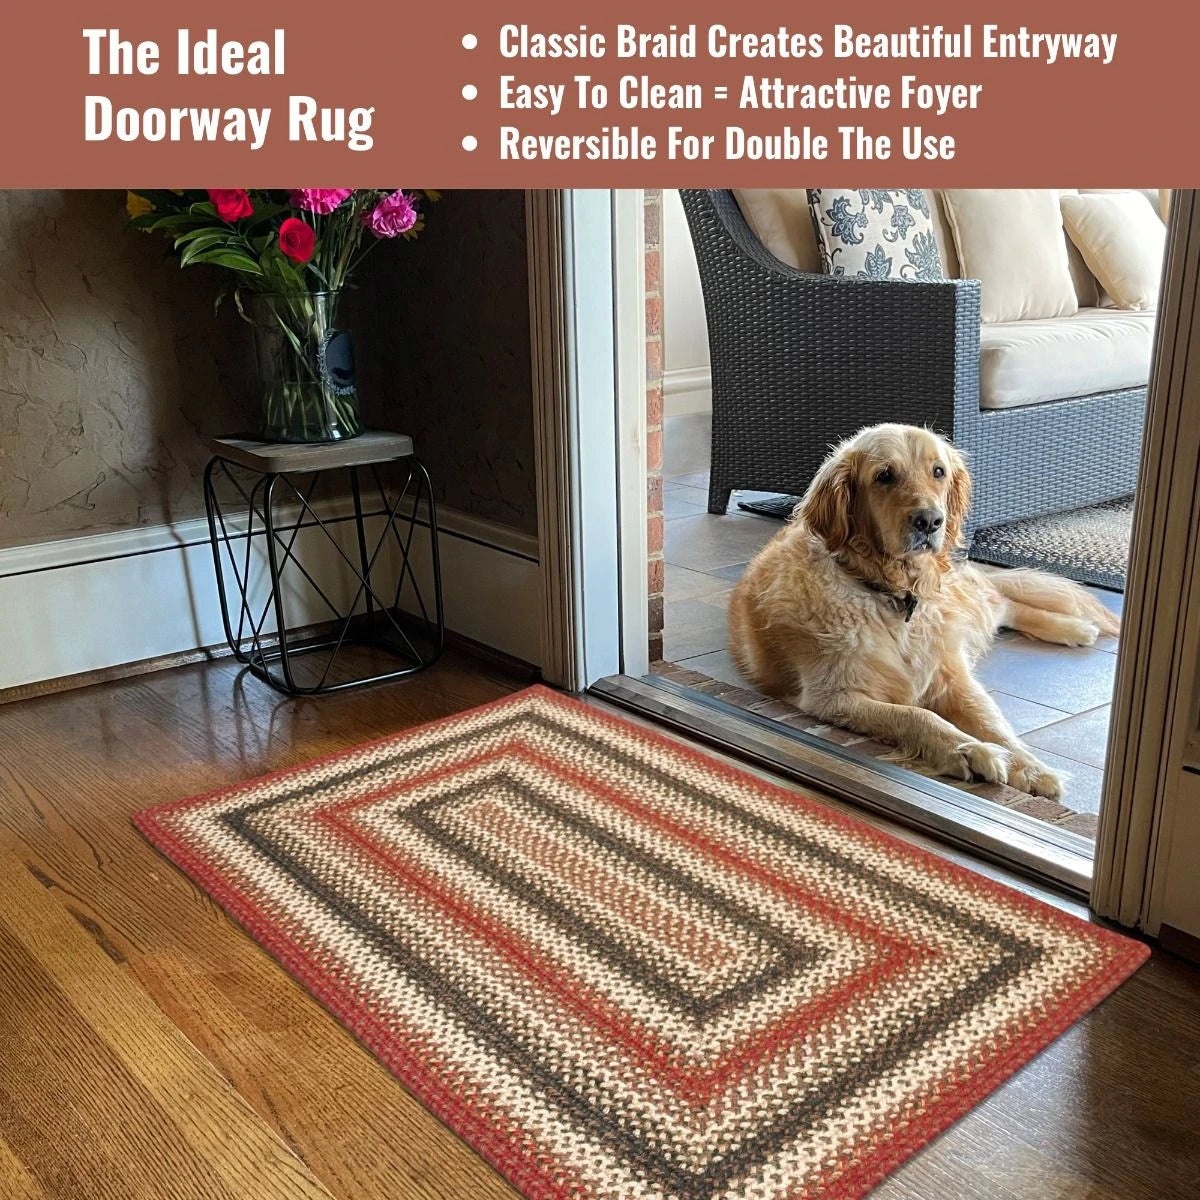 A golden retriever lays on the porch wtih a rectangle braided rug in colors of rust, green, and cream, in the doorway.